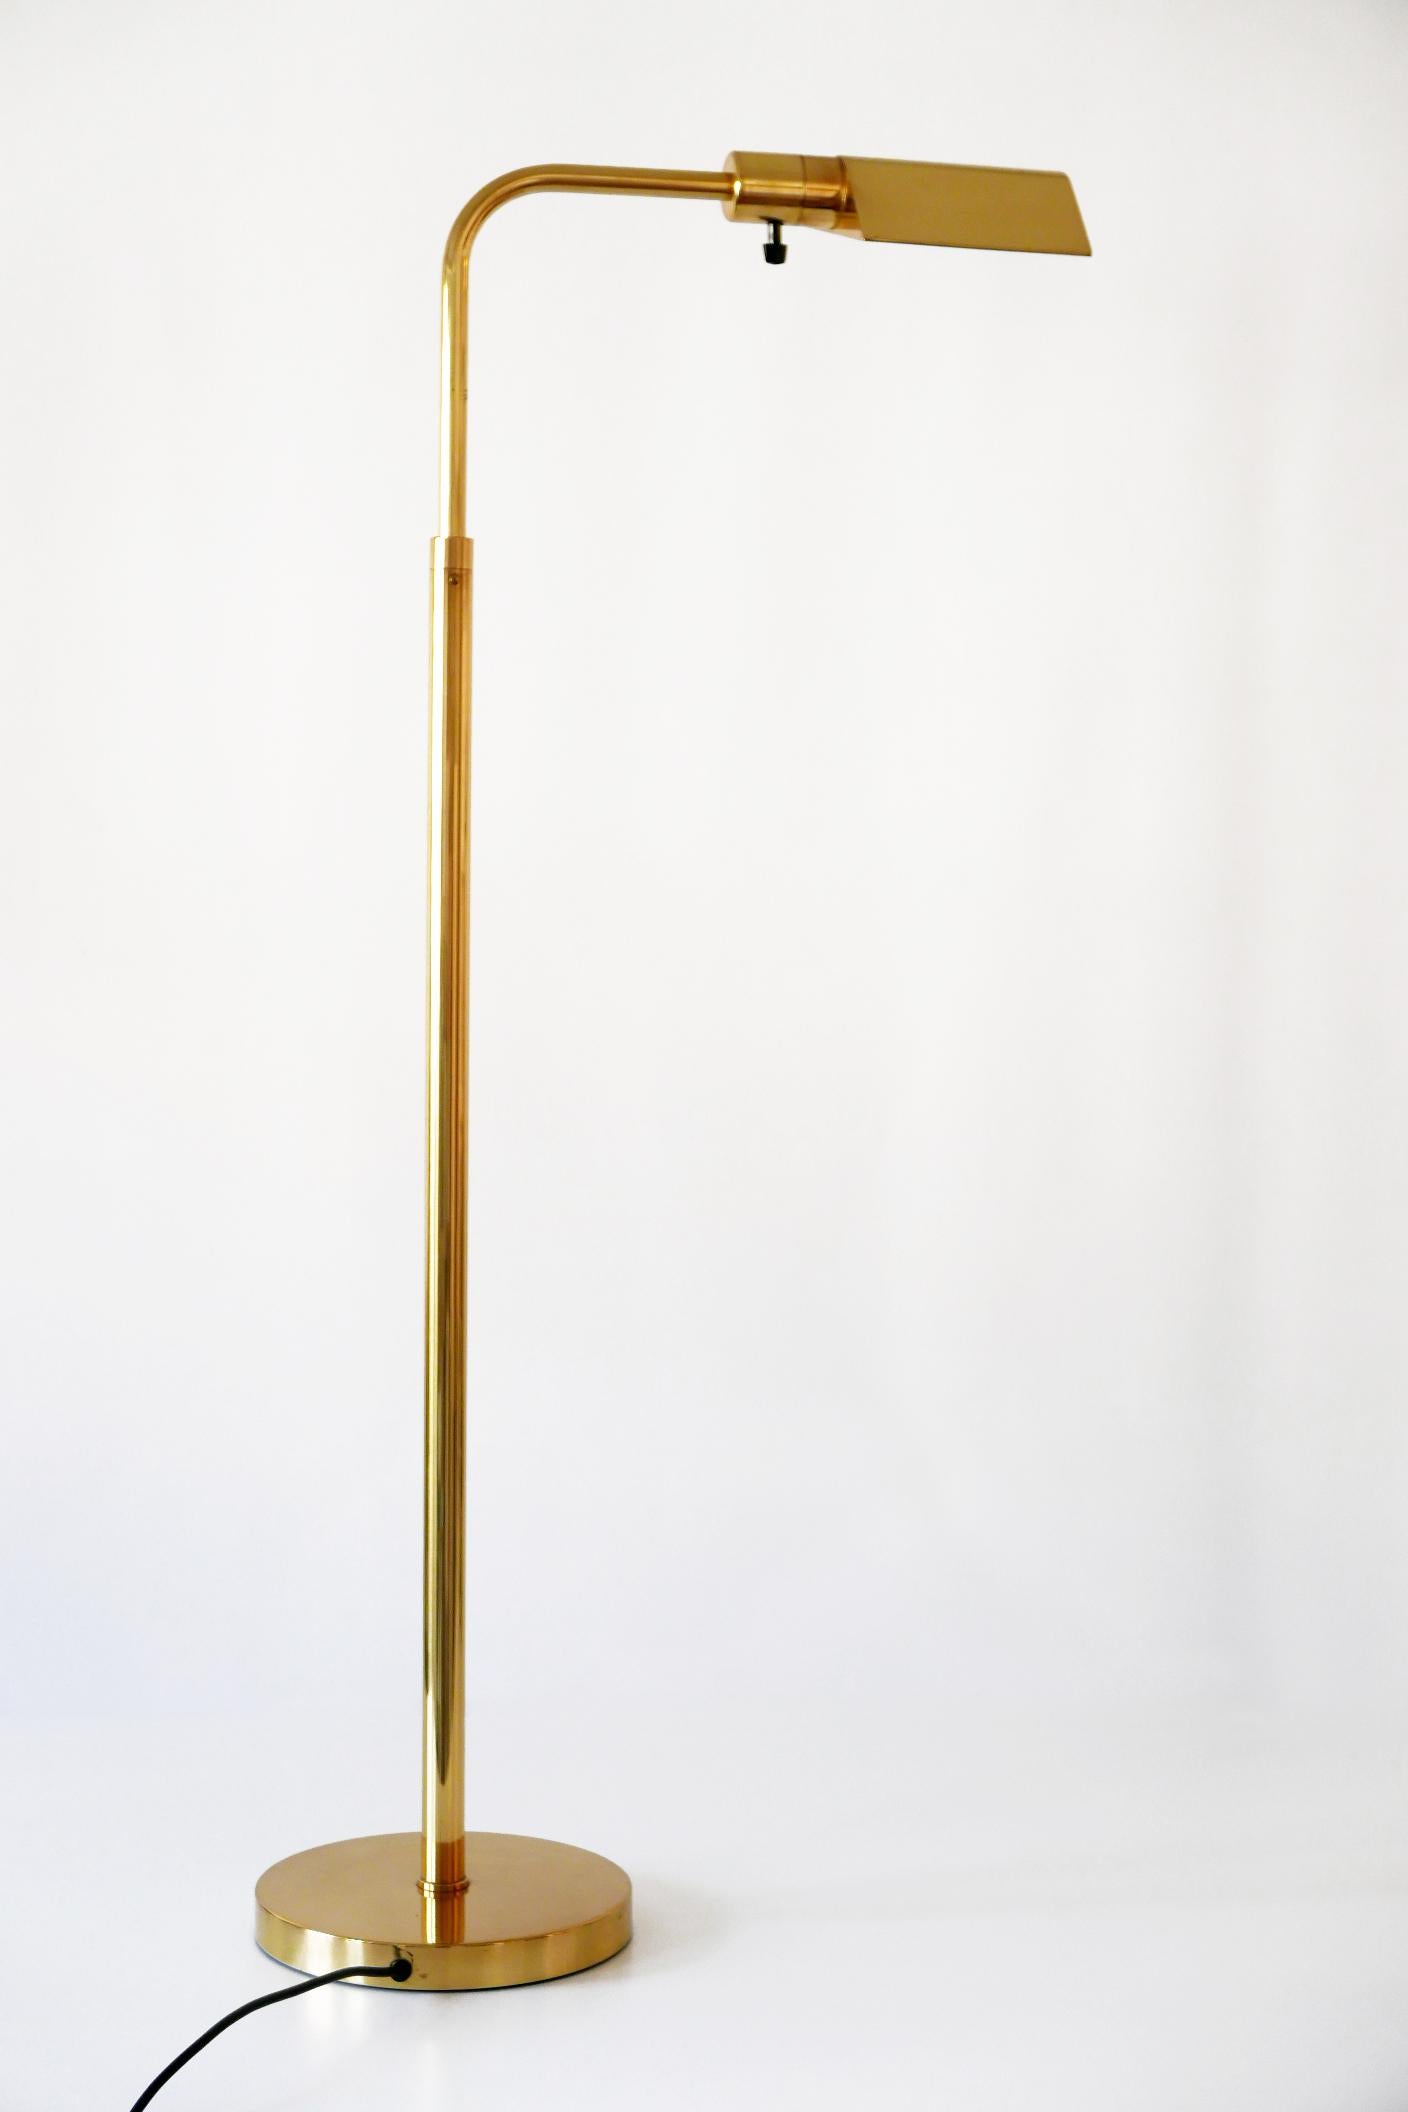 Elegant Mid-Century Modern floor lamp or reading light with adjustable height and shade. Manufactured by Metalarte Spain for Hansen Lamps New York, 1970s.

Executed in brass, the lamp needs 1 x E27 Edison screw fit bulb, is wired, and in working